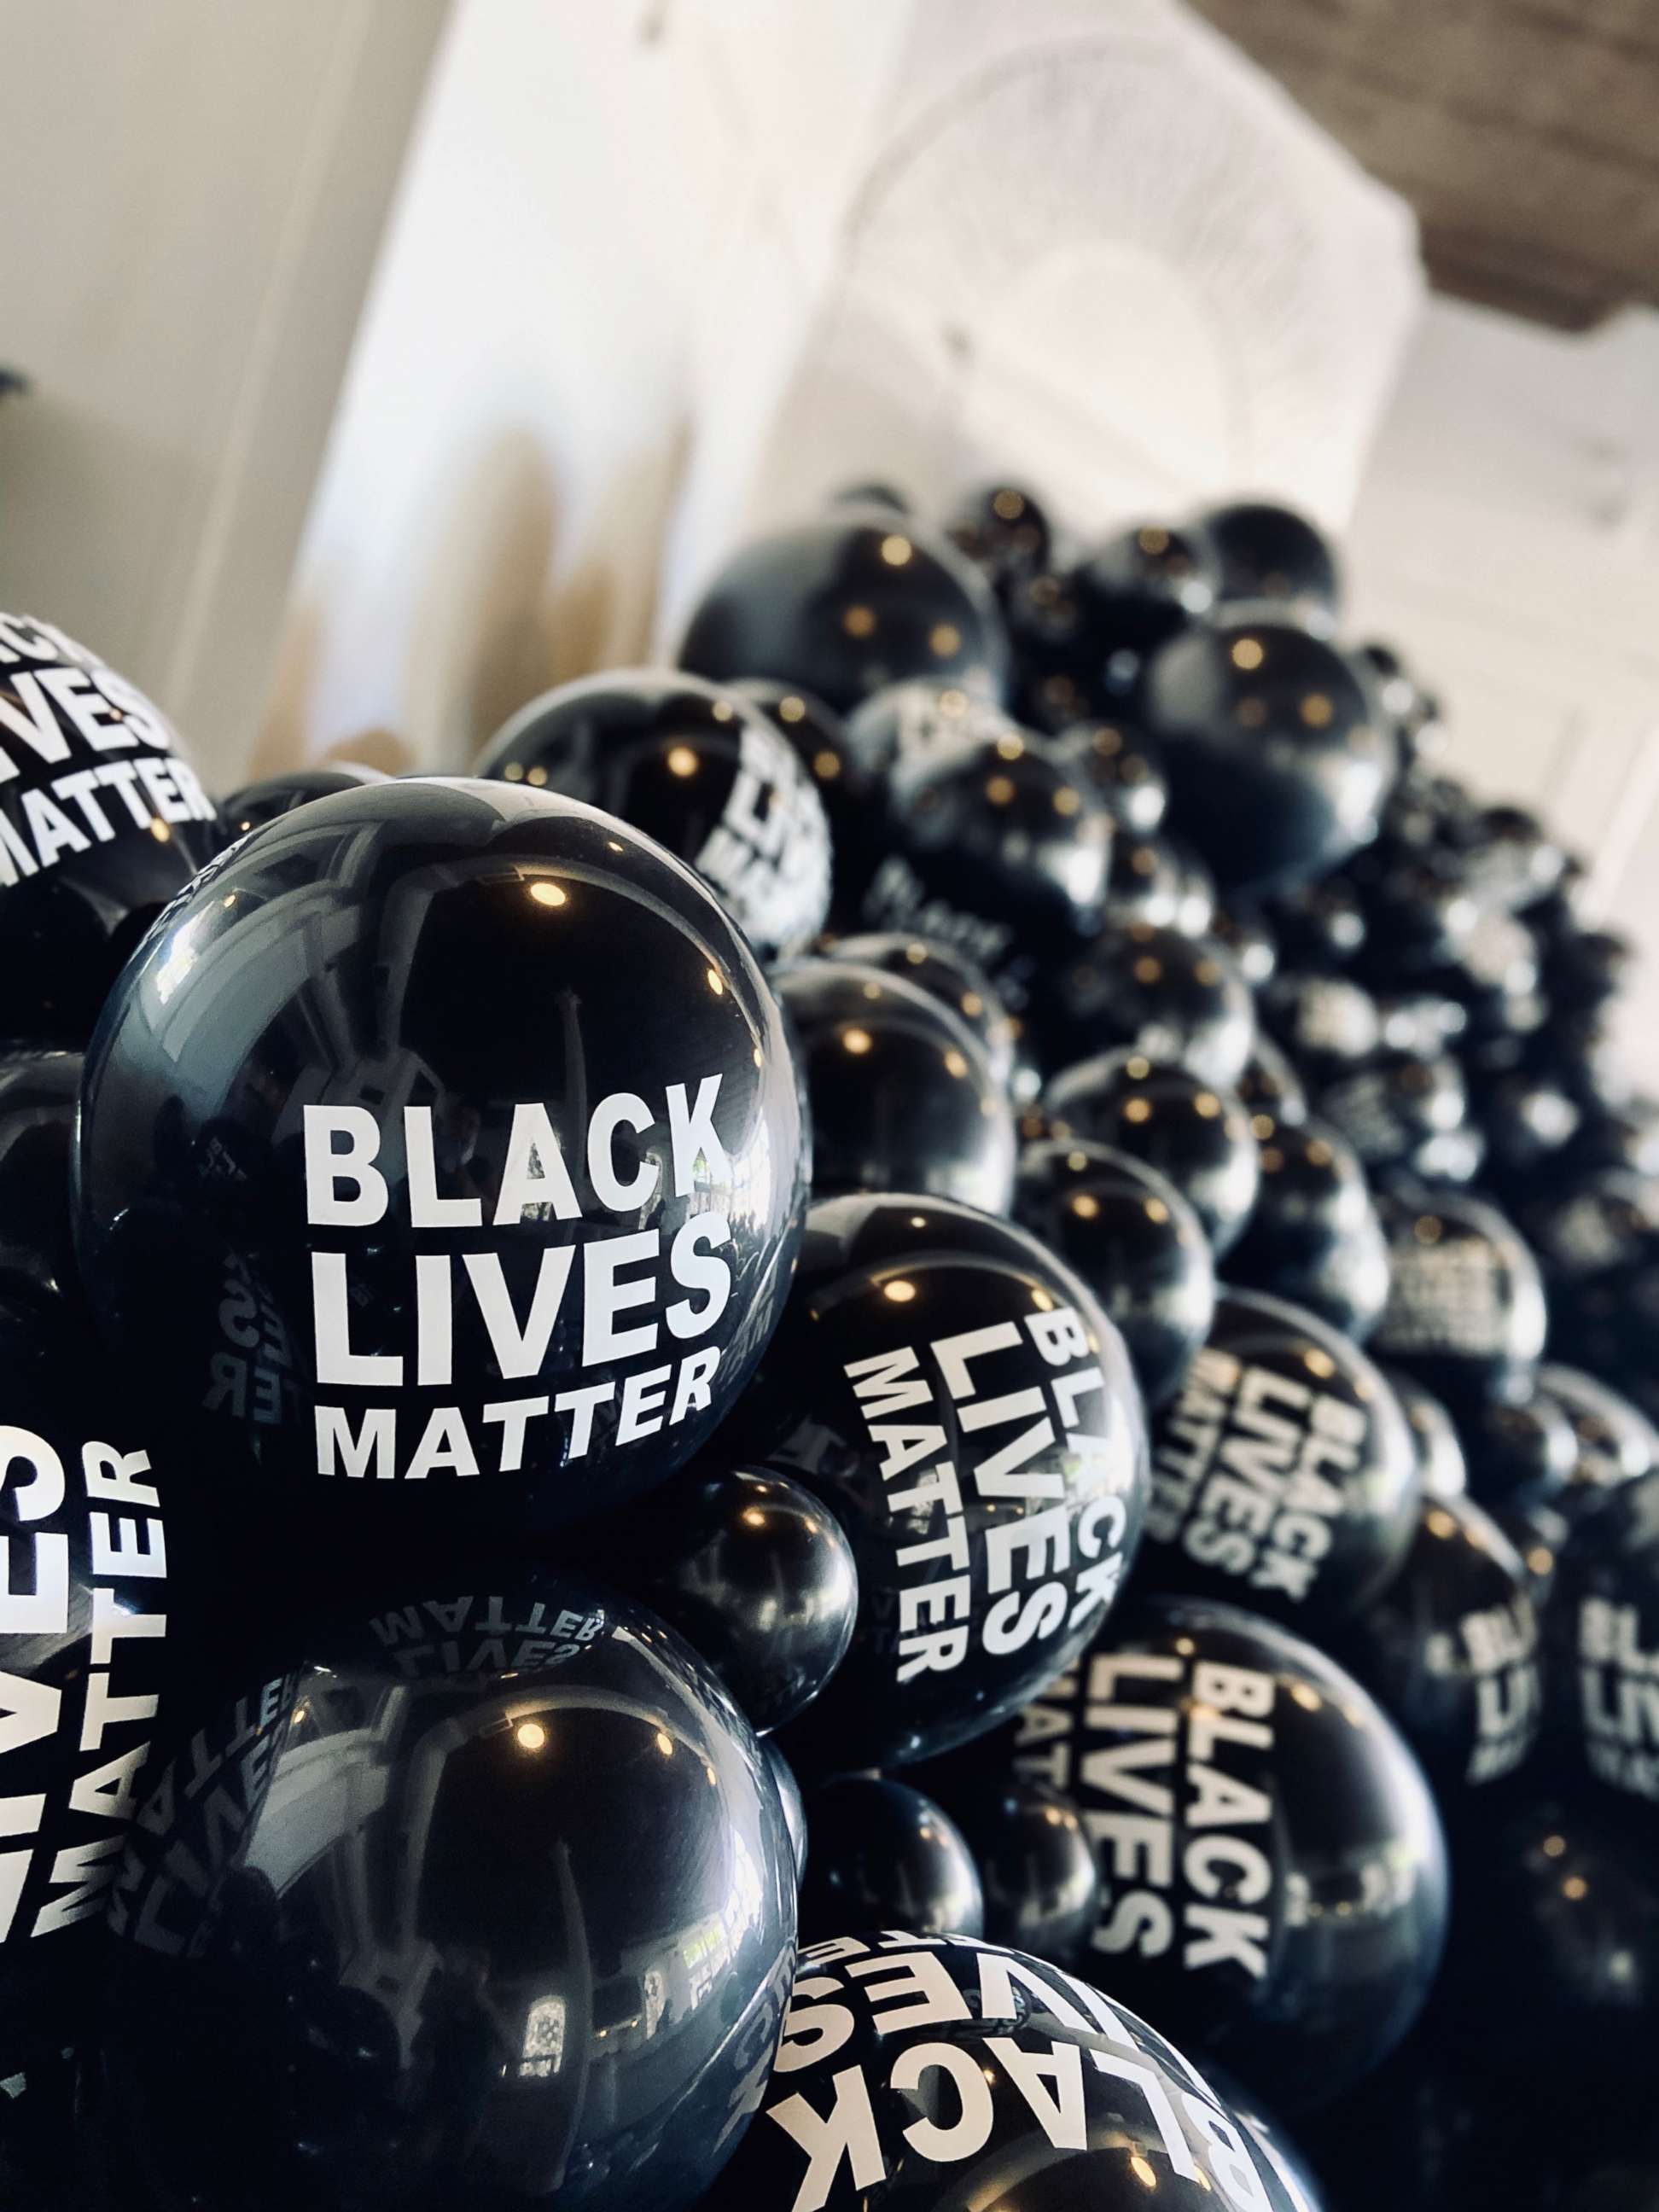 PHOTO: Luft Balloons is giving away free Black Lives Matter balloons in Chicago.